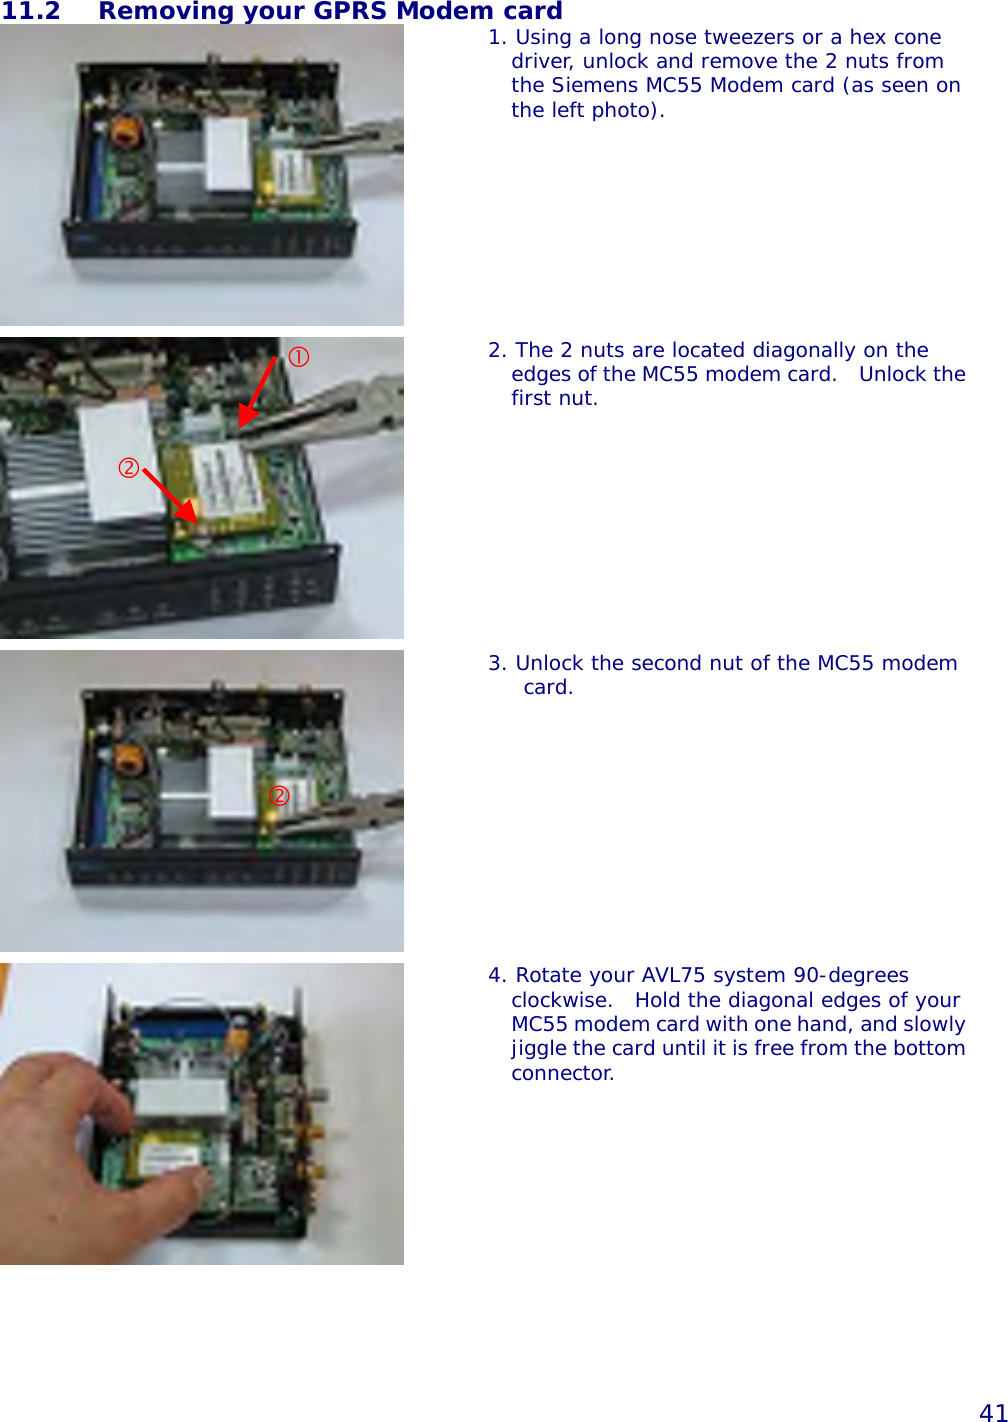   41 11.2  Removing your GPRS Modem card  1. Using a long nose tweezers or a hex cone driver, unlock and remove the 2 nuts from the Siemens MC55 Modem card (as seen on the left photo).    2. The 2 nuts are located diagonally on the edges of the MC55 modem card.   Unlock thefirst nut.   3. Unlock the second nut of the MC55 modem card.   4. Rotate your AVL75 system 90-degrees clockwise.  Hold the diagonal edges of your MC55 modem card with one hand, and slowlyjiggle the card until it is free from the bottomconnector.        